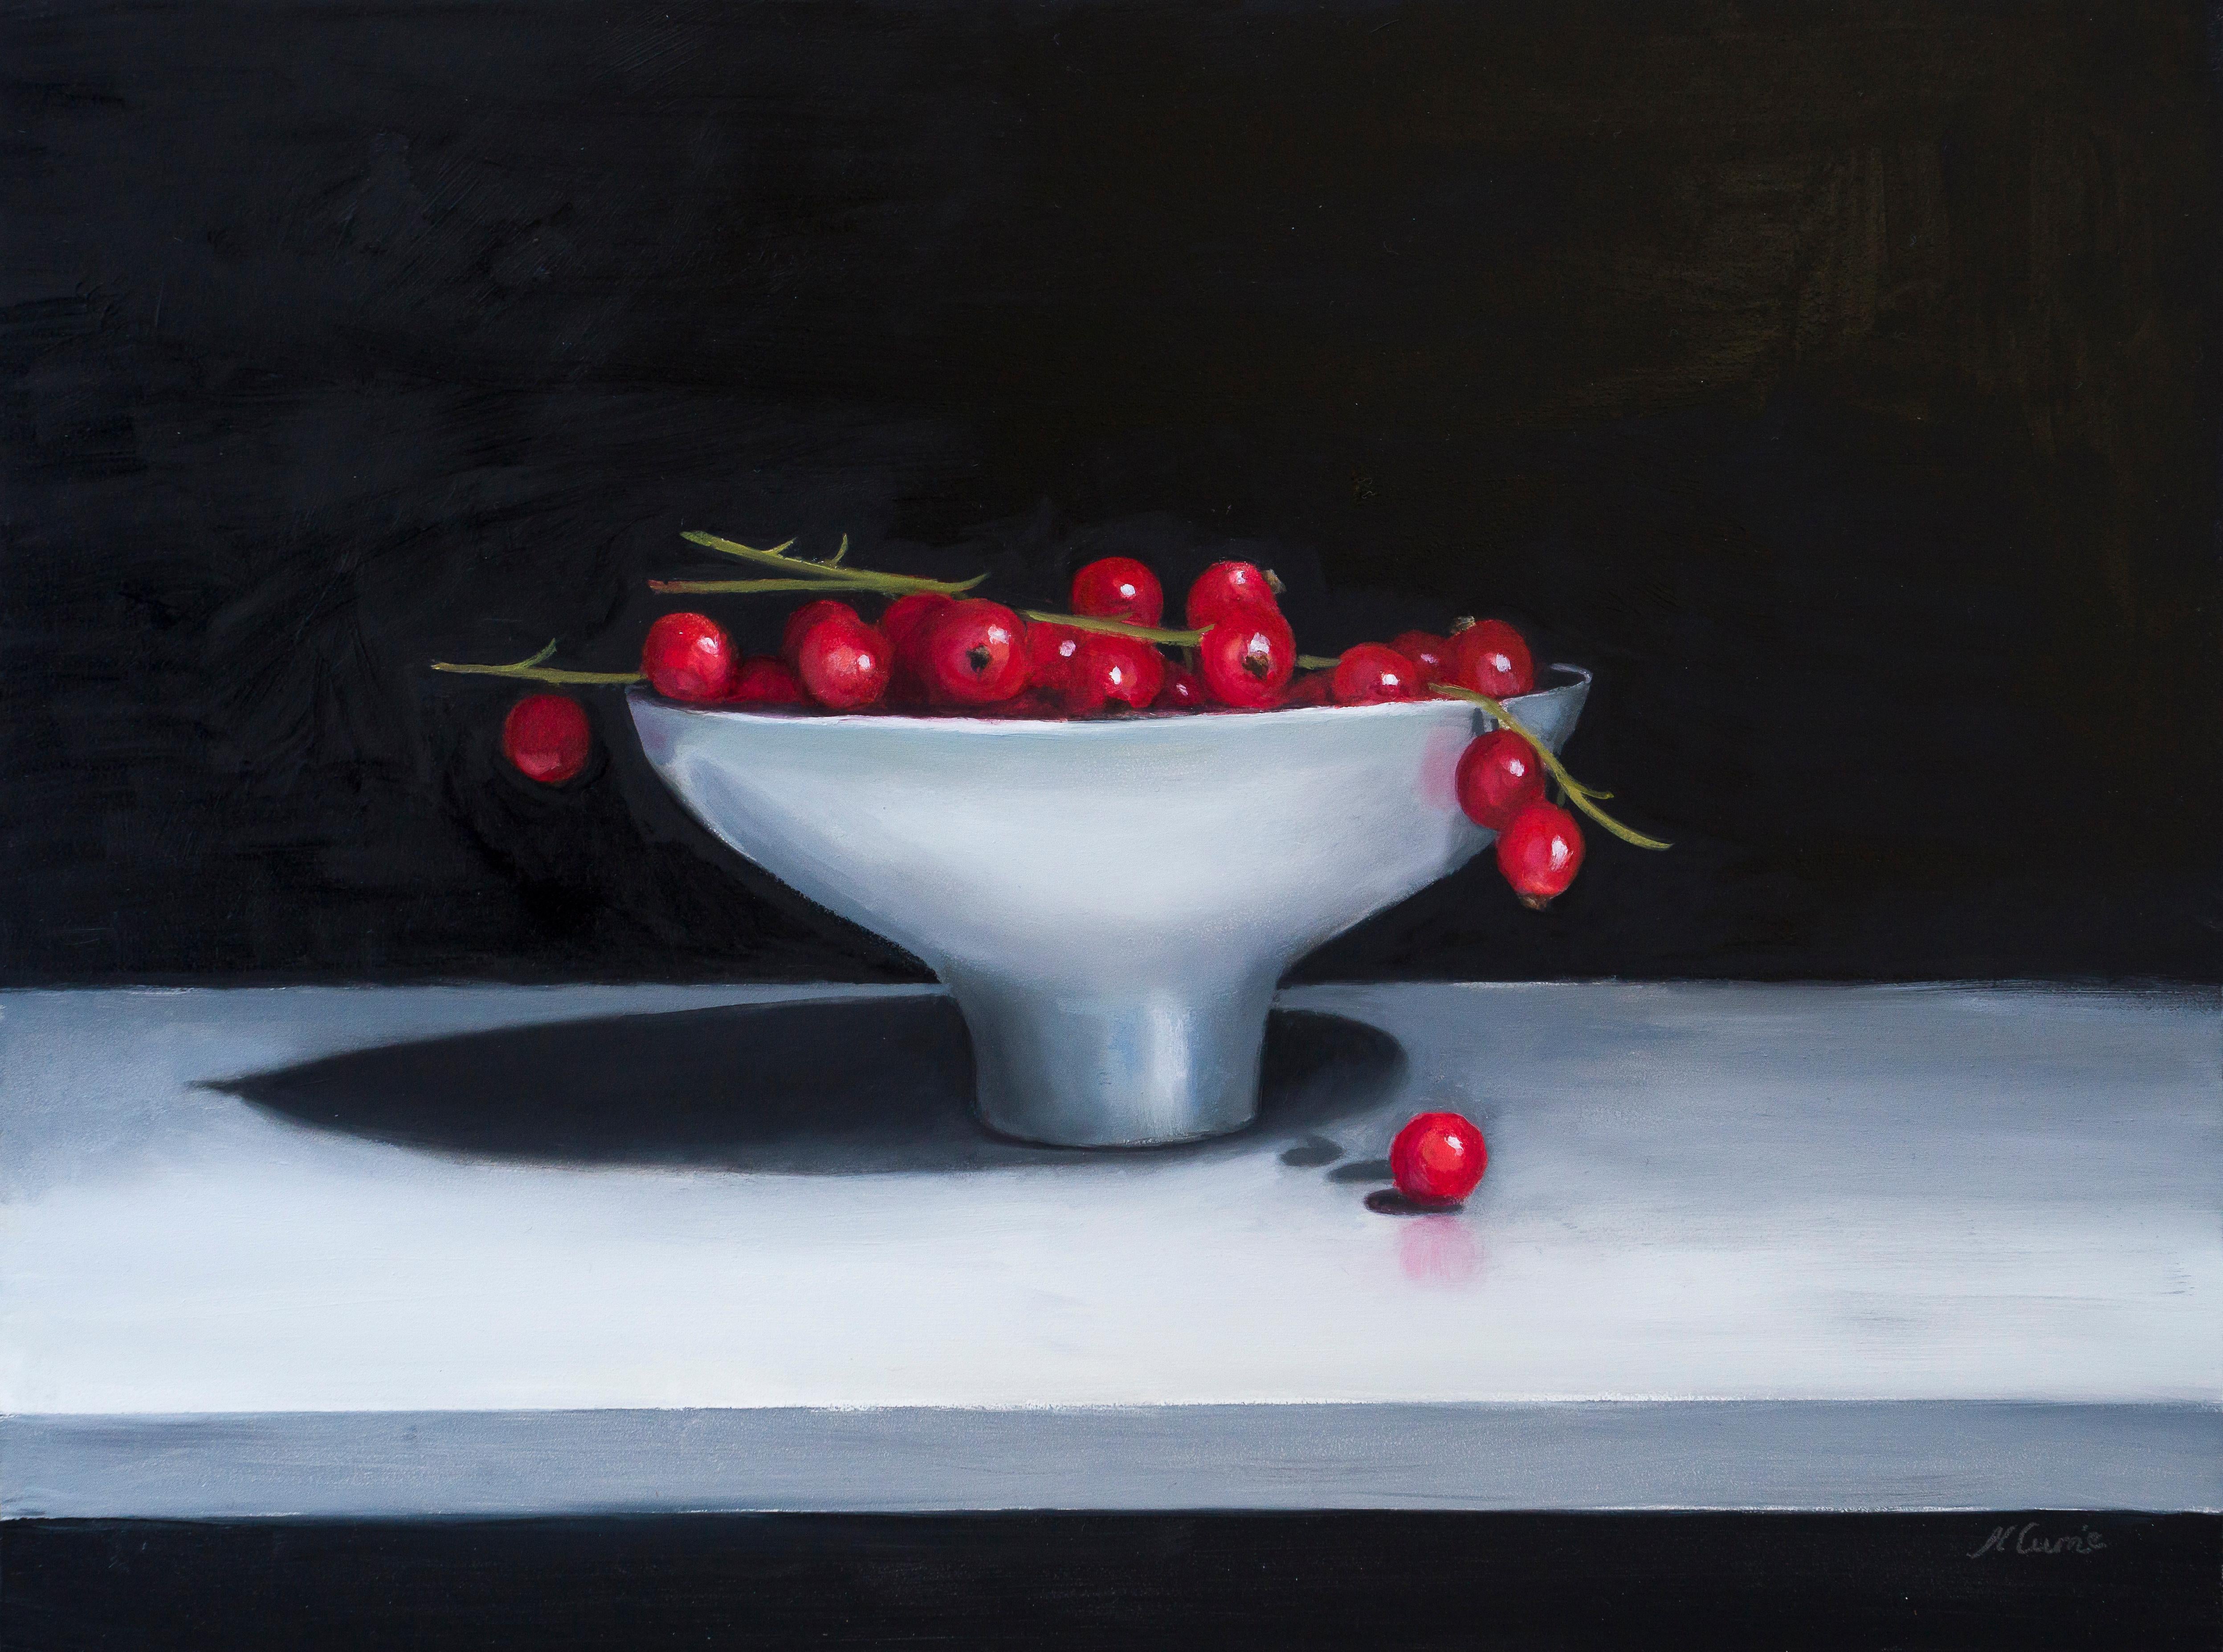 English Redcurrents in a Ceramic Bowl, Still Life Oil Painting For Sale